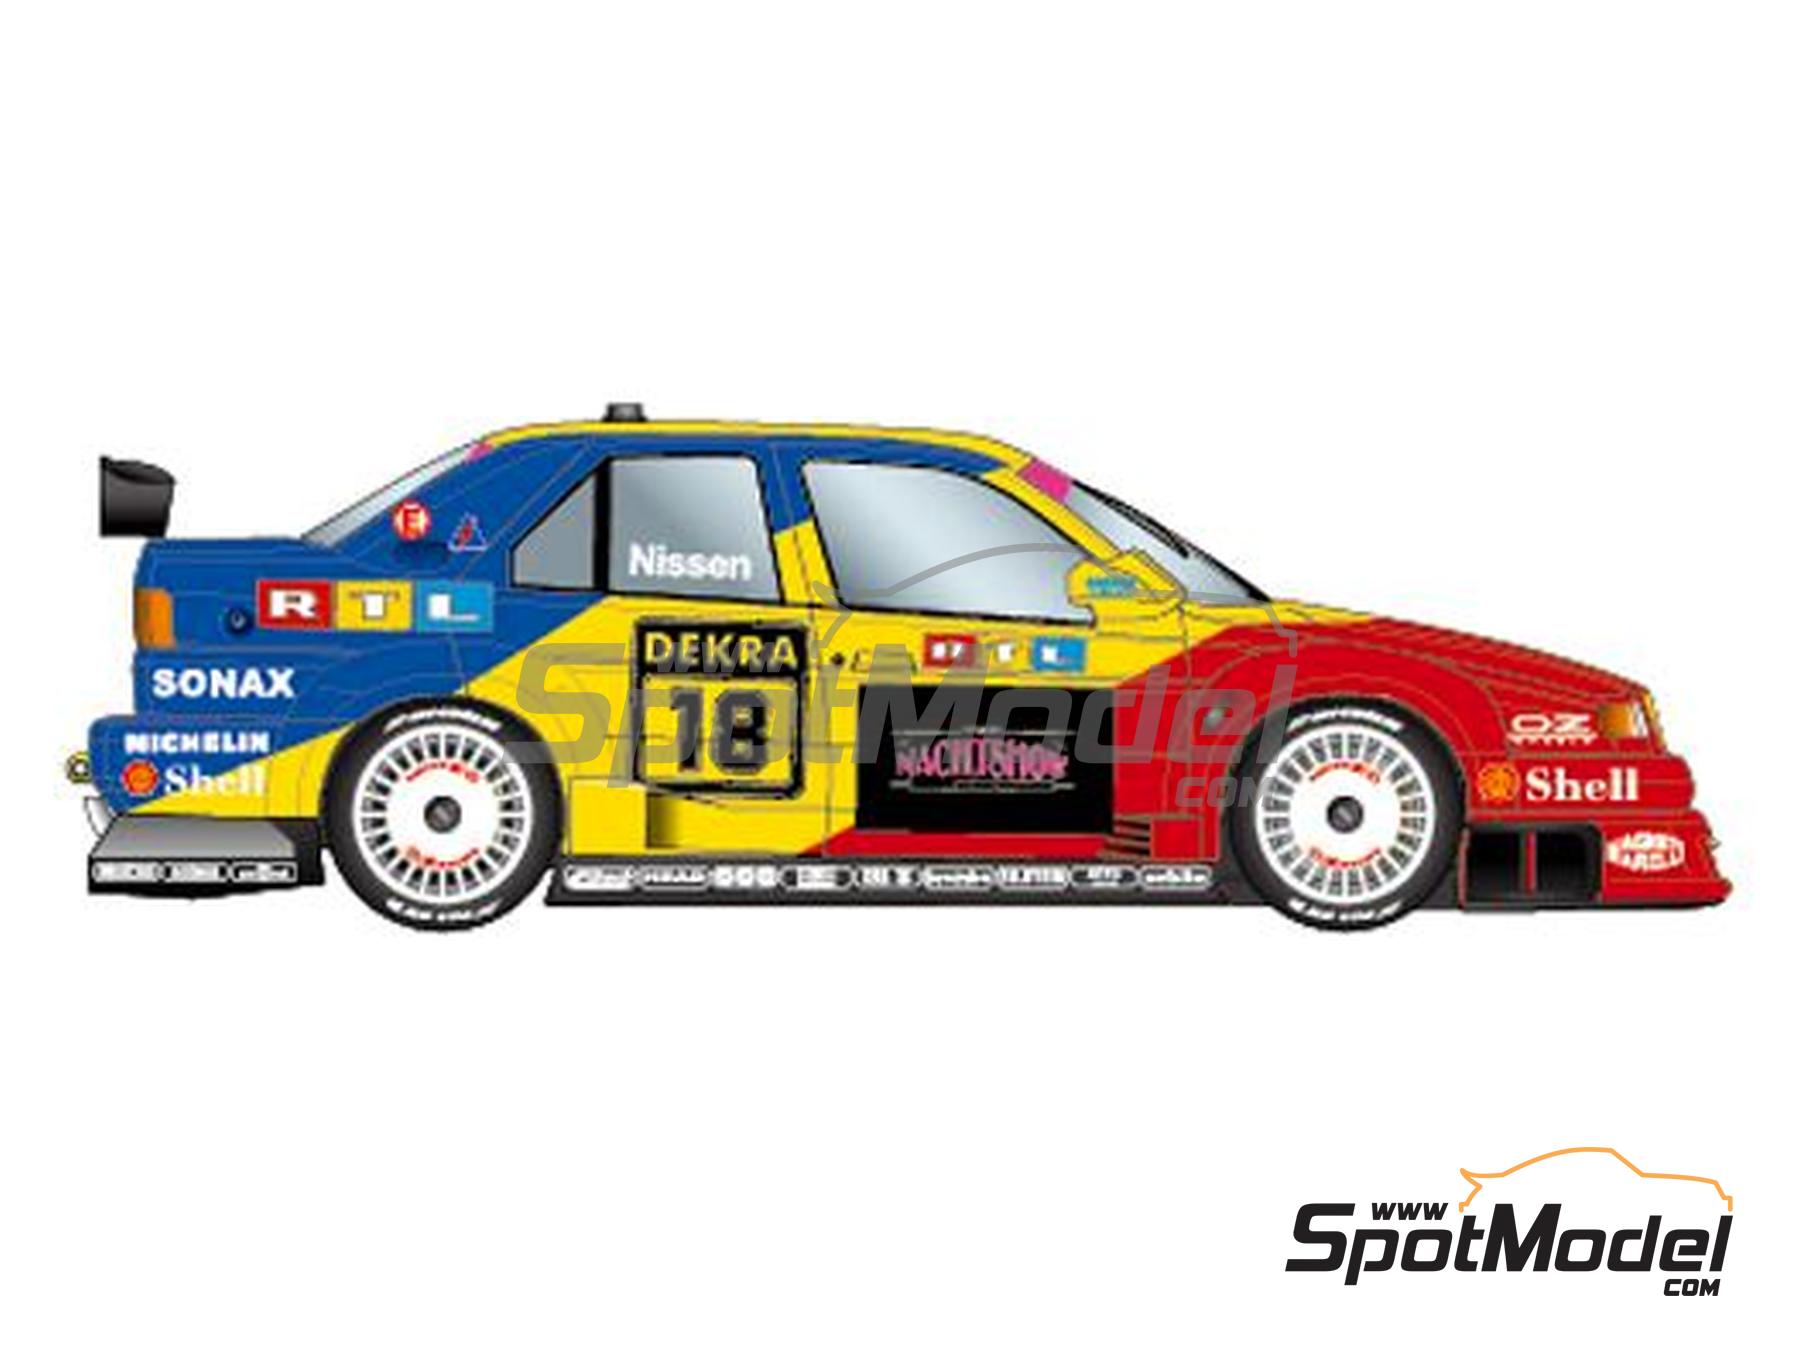 Alfa Romeo 155 V6 TI Schübel Engineering Team sponsored by RTL - DTM 1994.  Marking / livery in 1/24 scale manufactured by Studio27 (ref. ST27-TK2469,